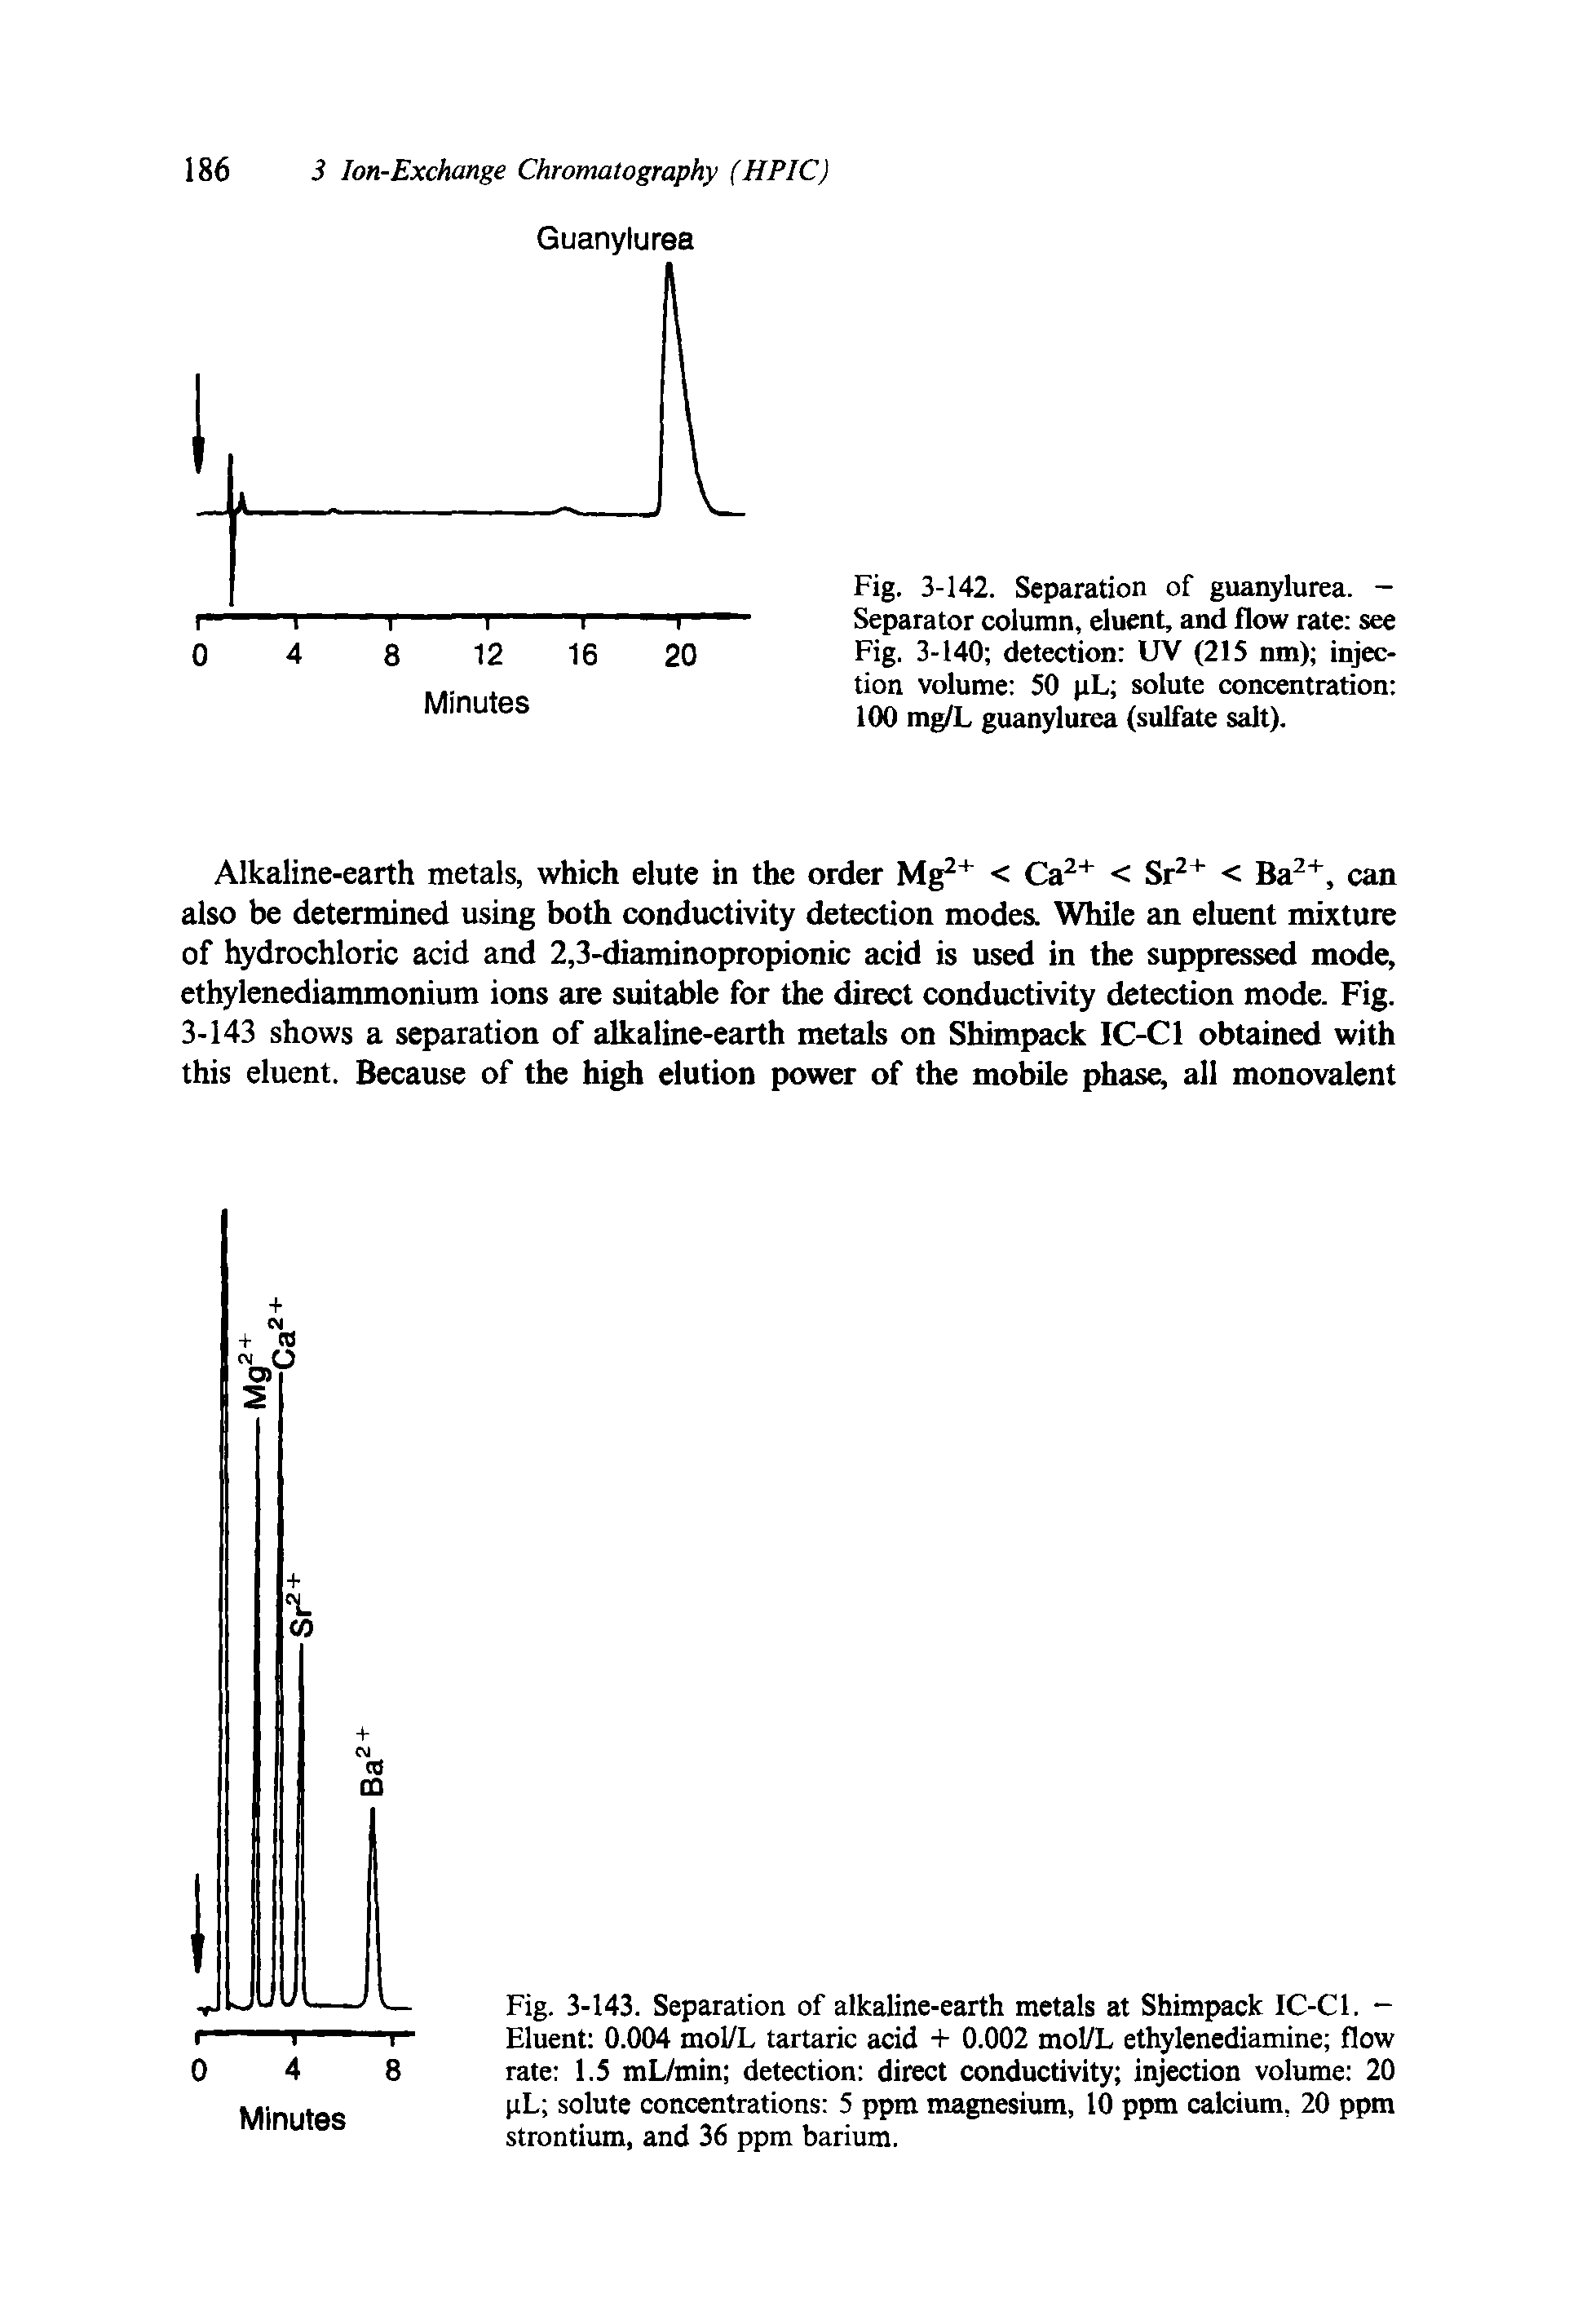 Fig. 3-143. Separation of alkaline-earth metals at Shimpack IC-C1. -Eluent 0.004 mol/L tartaric acid + 0.002 mol/L ethylenediamine flow rate 1.5 mL/min detection direct conductivity injection volume 20 pL solute concentrations 5 ppm magnesium, 10 ppm calcium, 20 ppm strontium, and 36 ppm barium.